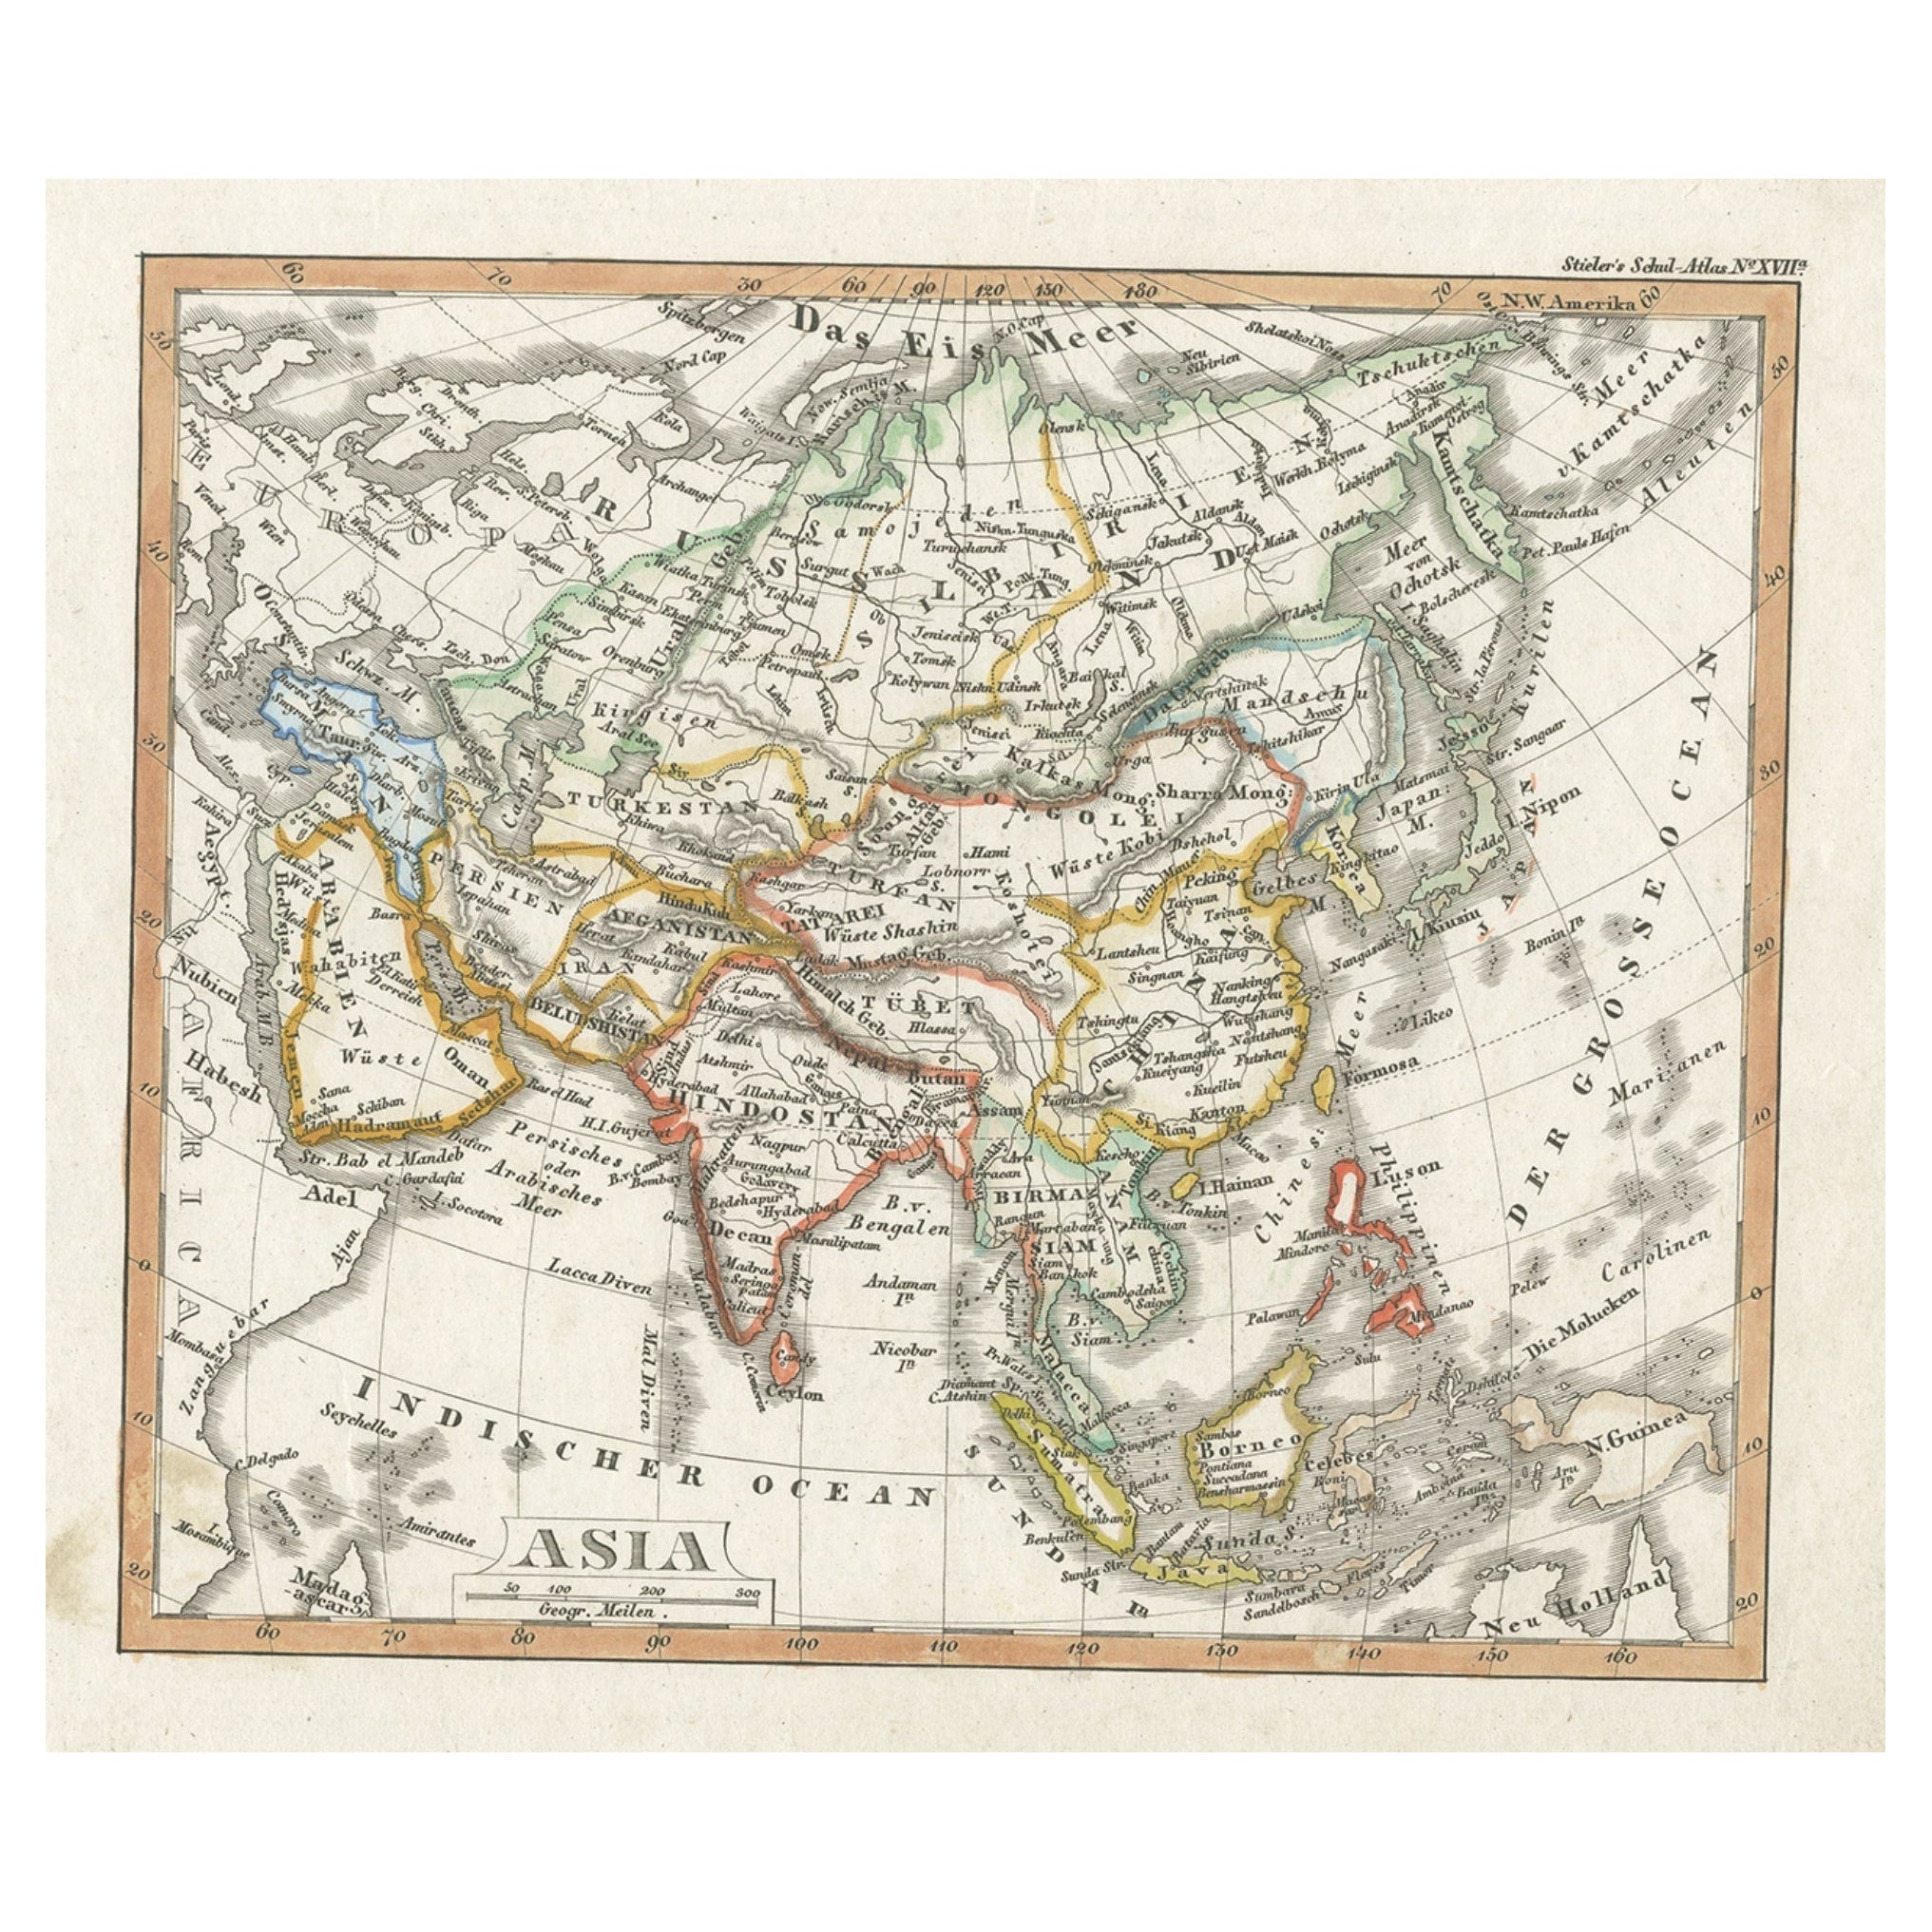 Charming Scarce Small Antique Map of Asia, 1837